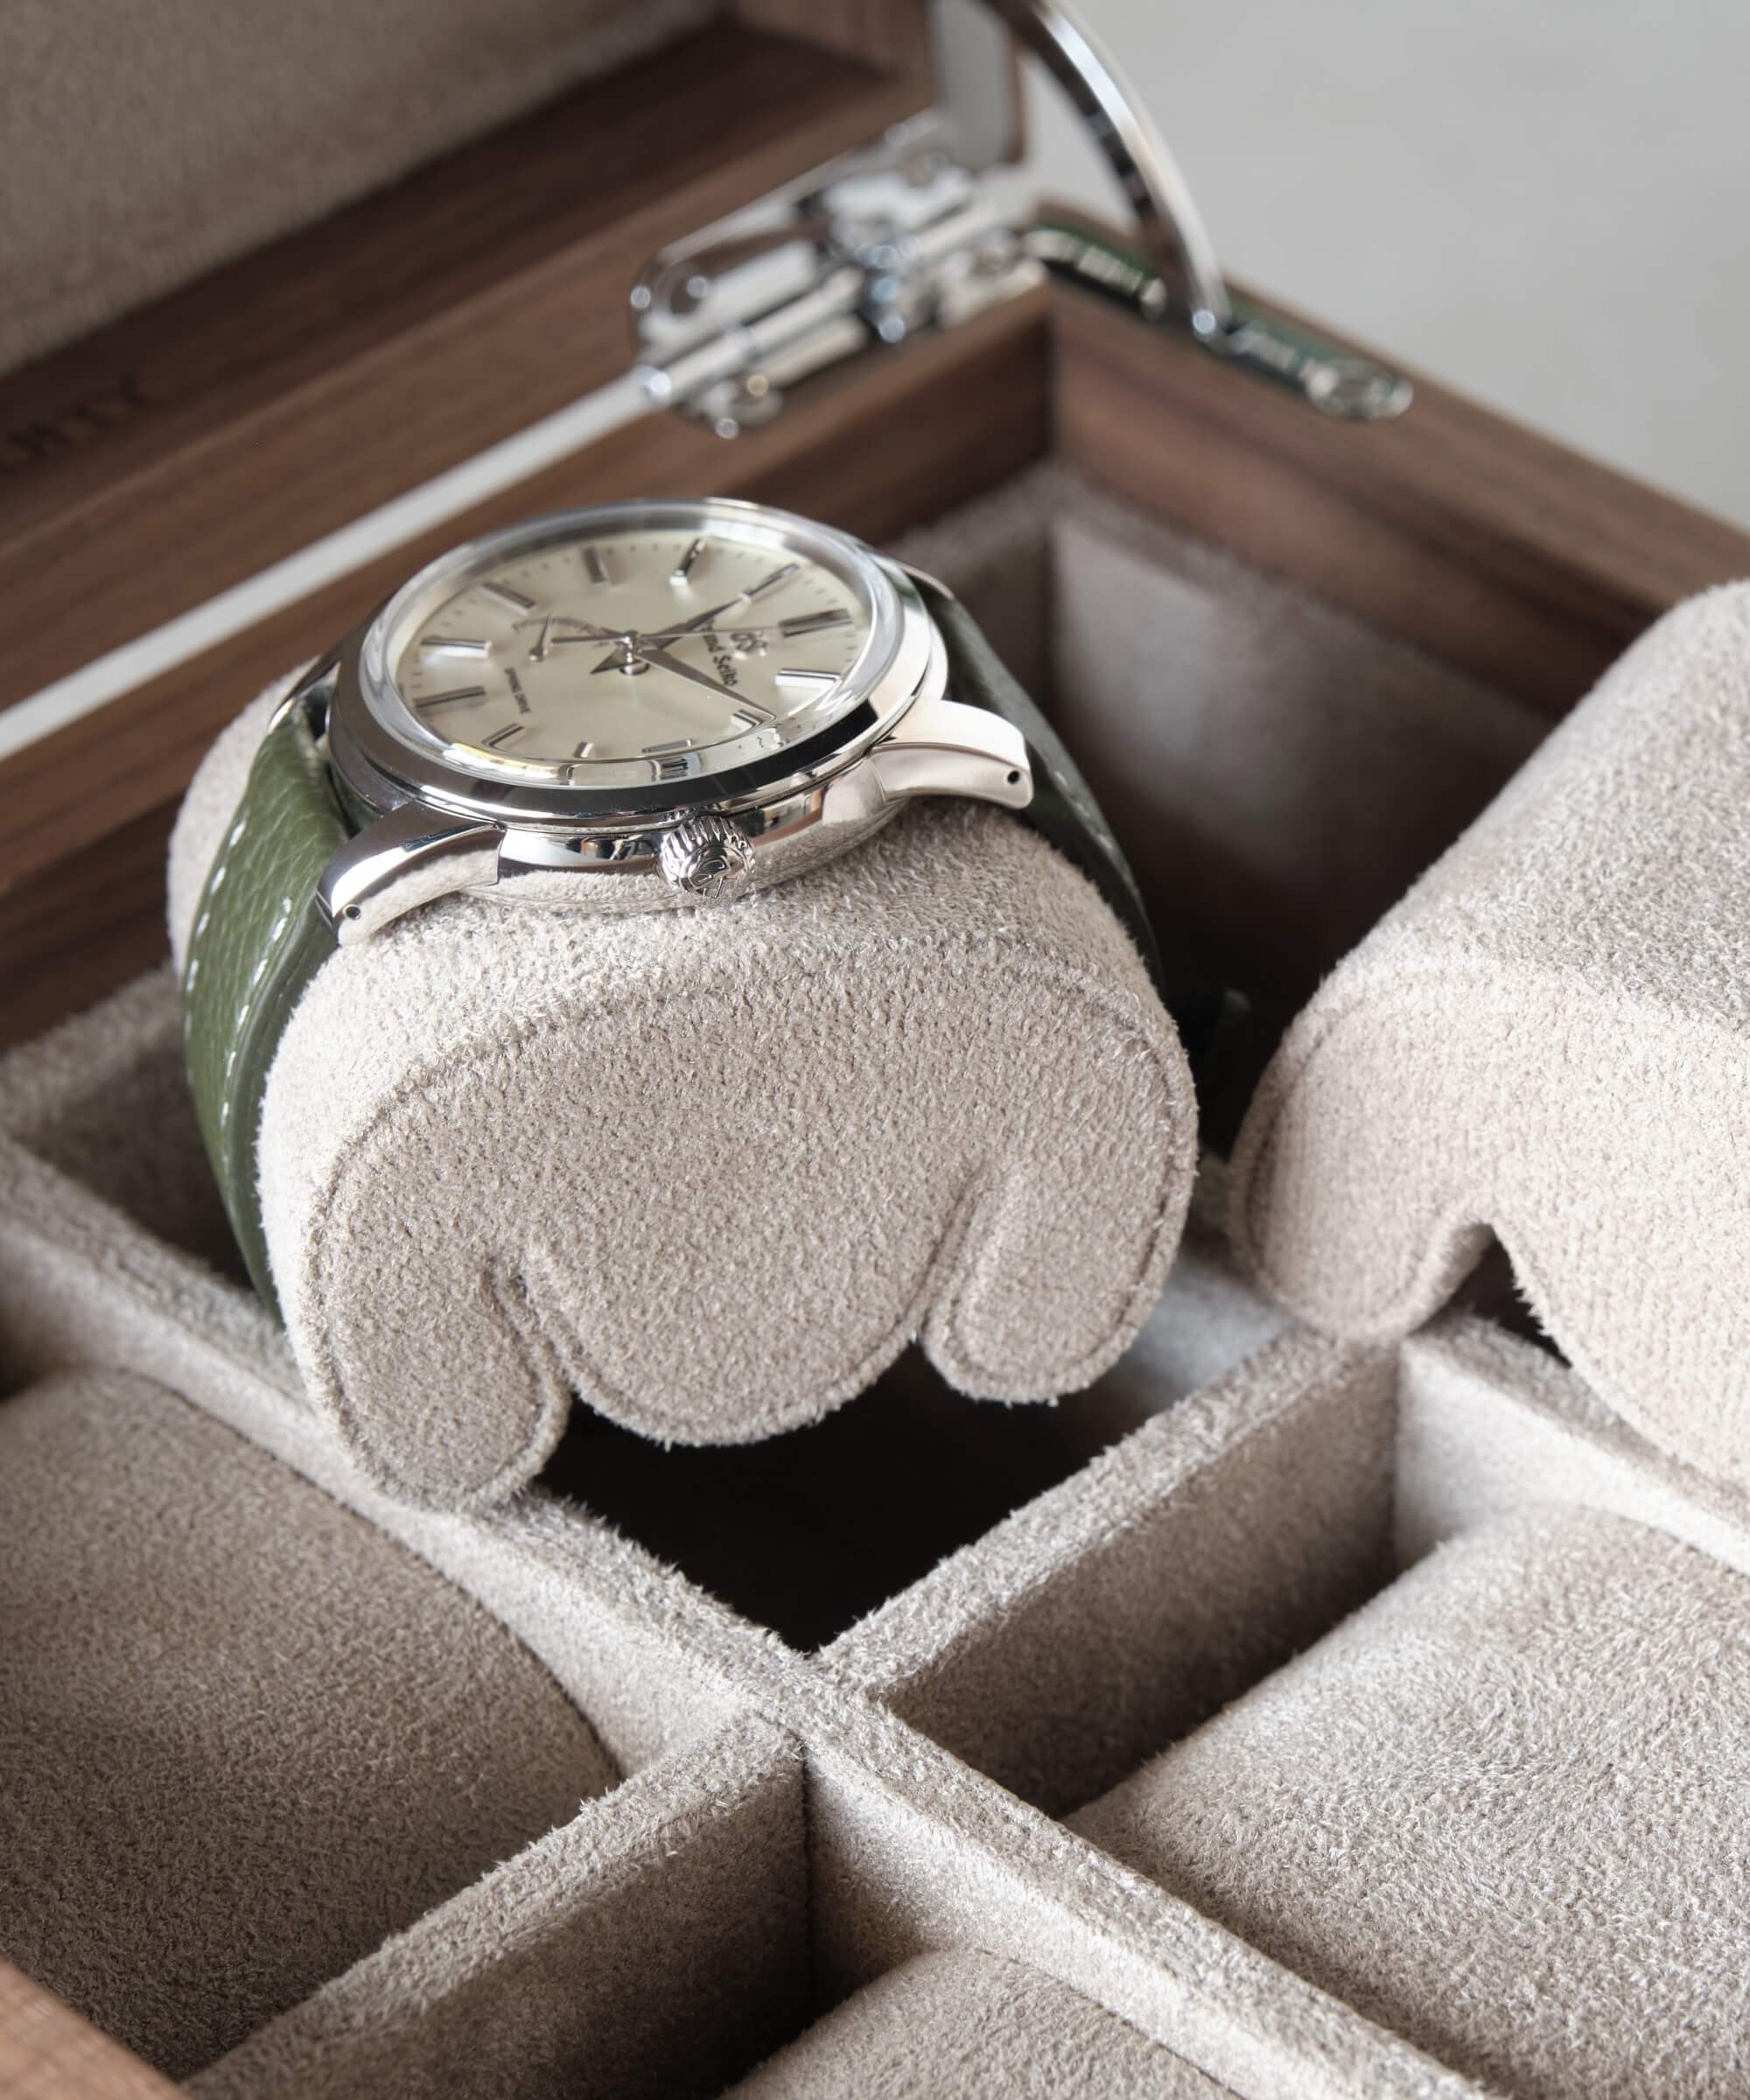 A watch enthusiast's Grove 6 Slot Watch Box with Glass Lid - Walnut by TAWBURY is sitting in a wooden box.